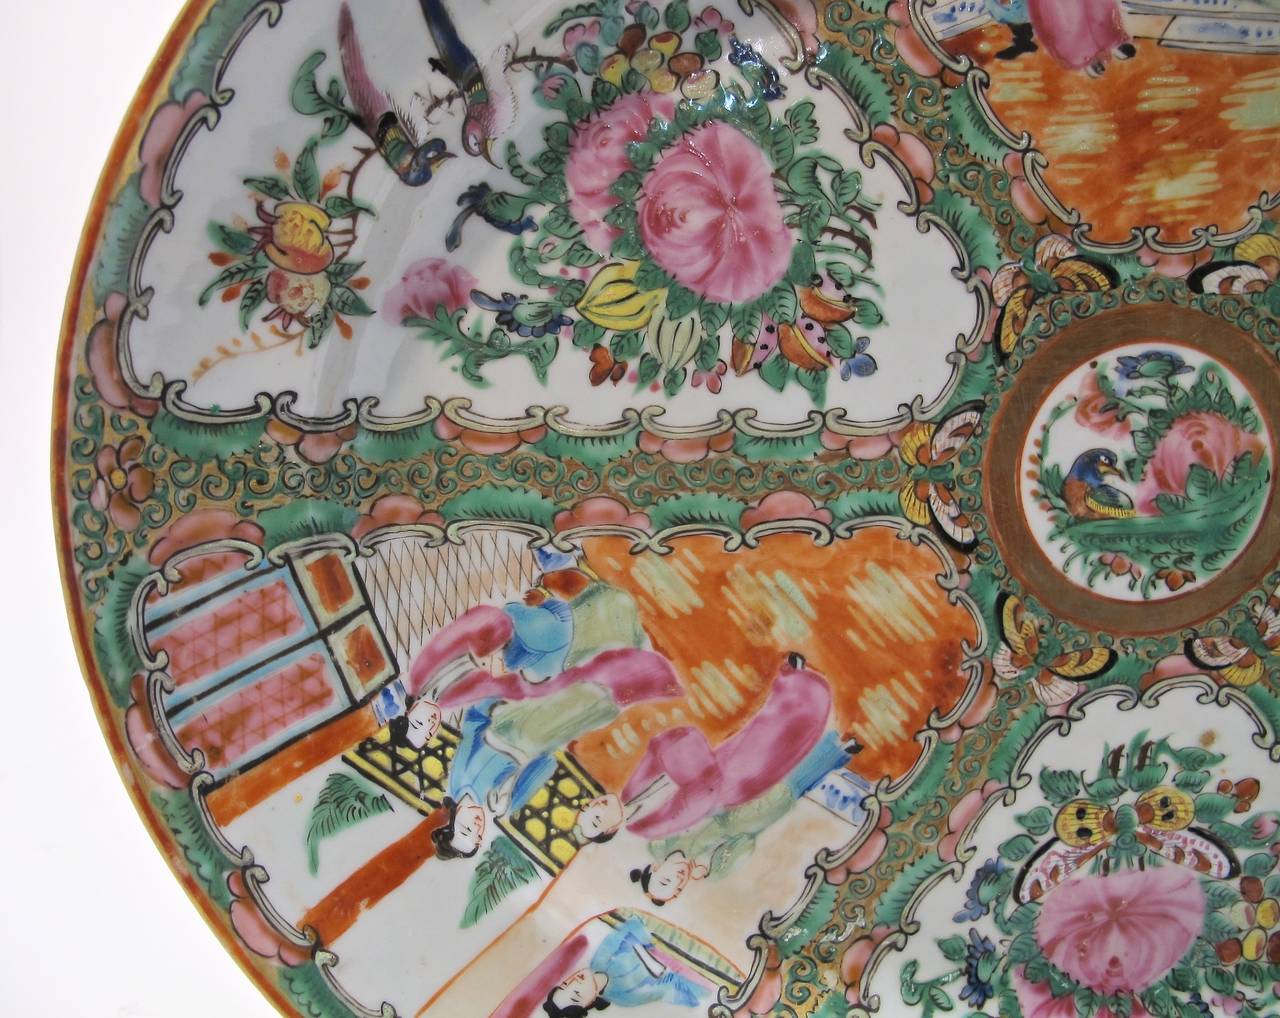 Large hand painted Famille Rose Medallion platter with beautifully detailed design of roses, people, butterflies and birds. Mid 19th century, China.